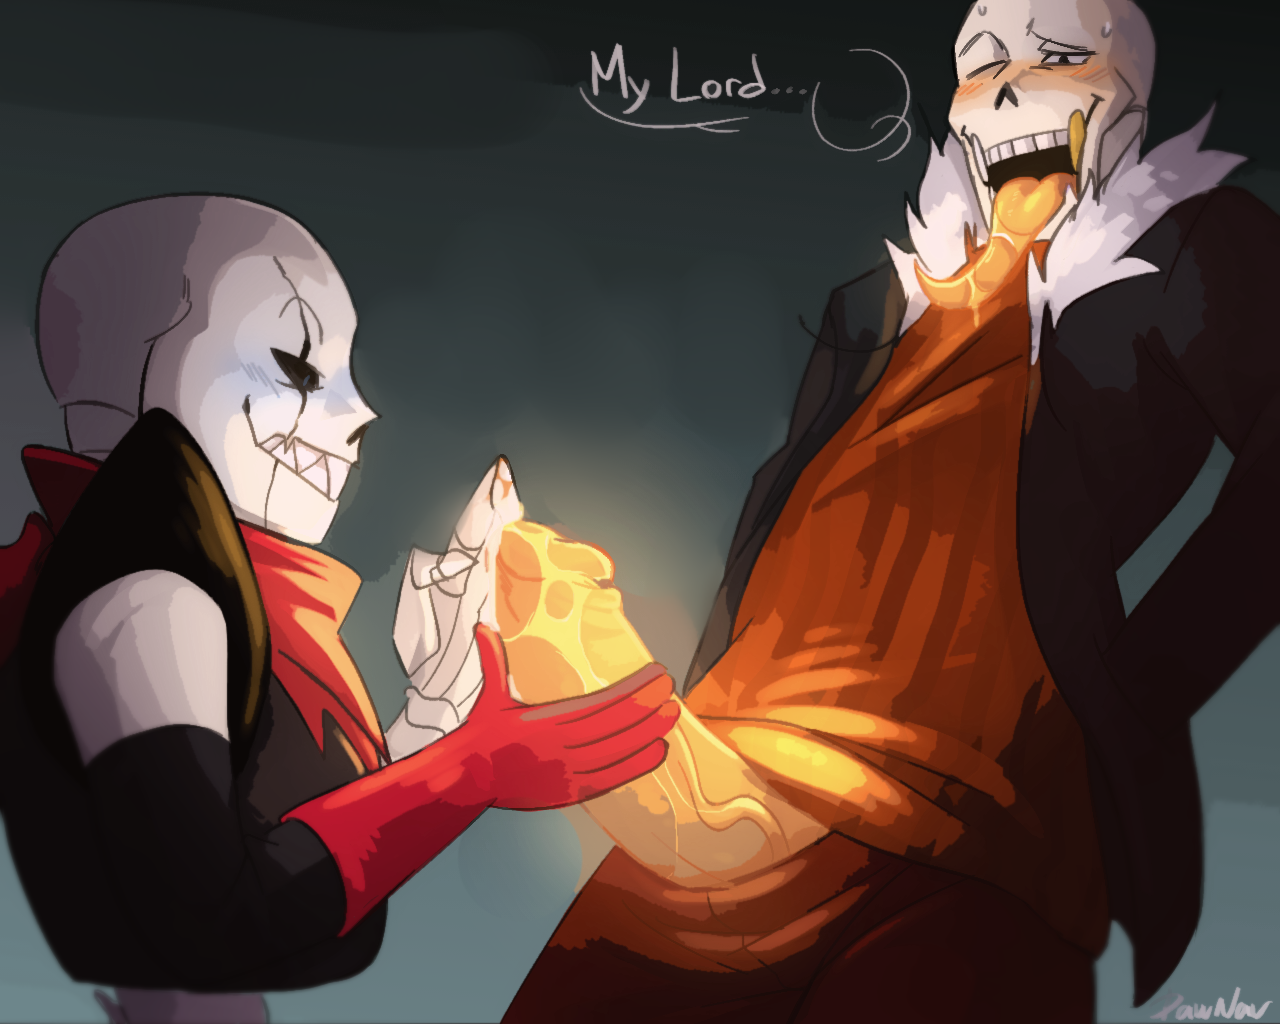 Sans x sans 18. Swapfell Papyrus рекс. Фонтцест Swapfell. Фелл Санс и Фелл Папирус 18 Фонцест. Ласт Фелл Папирус.